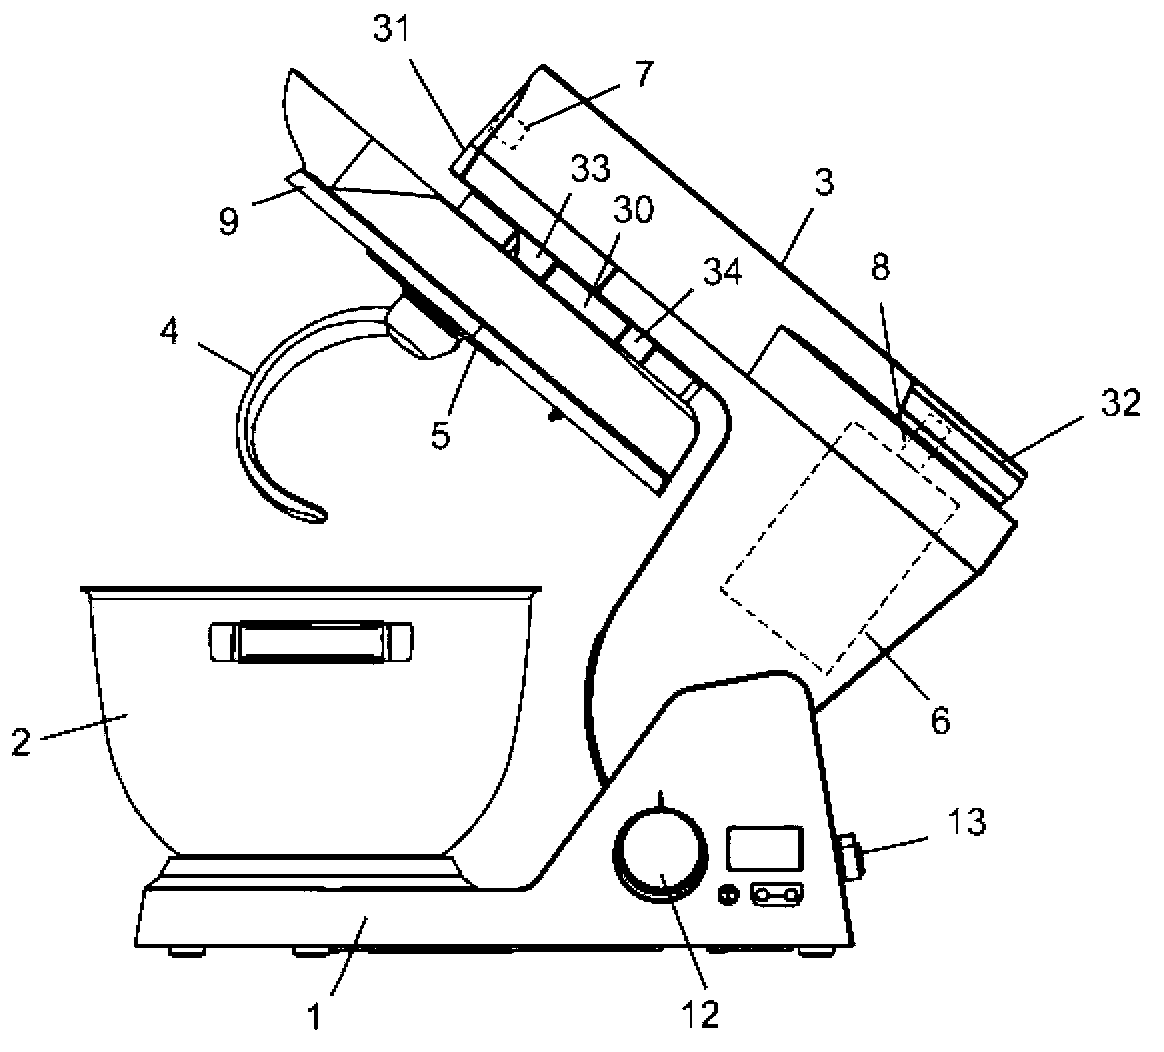 Electric household food processor comprising a base supporting a bowl and an arm solidly connected to the base